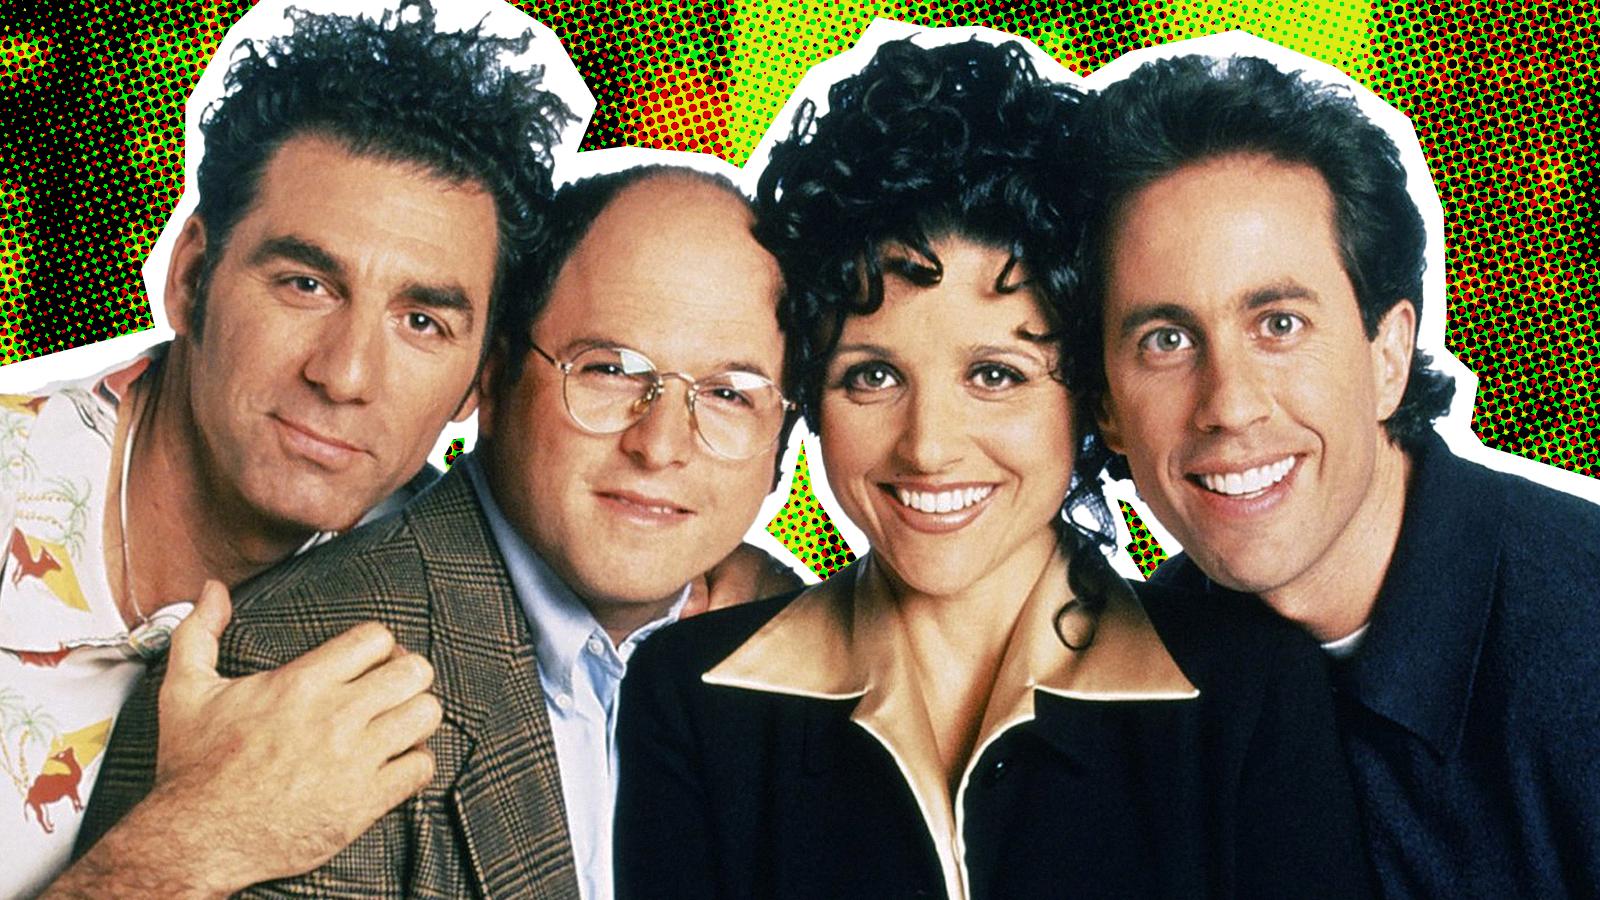 does seinfeld use a laugh track